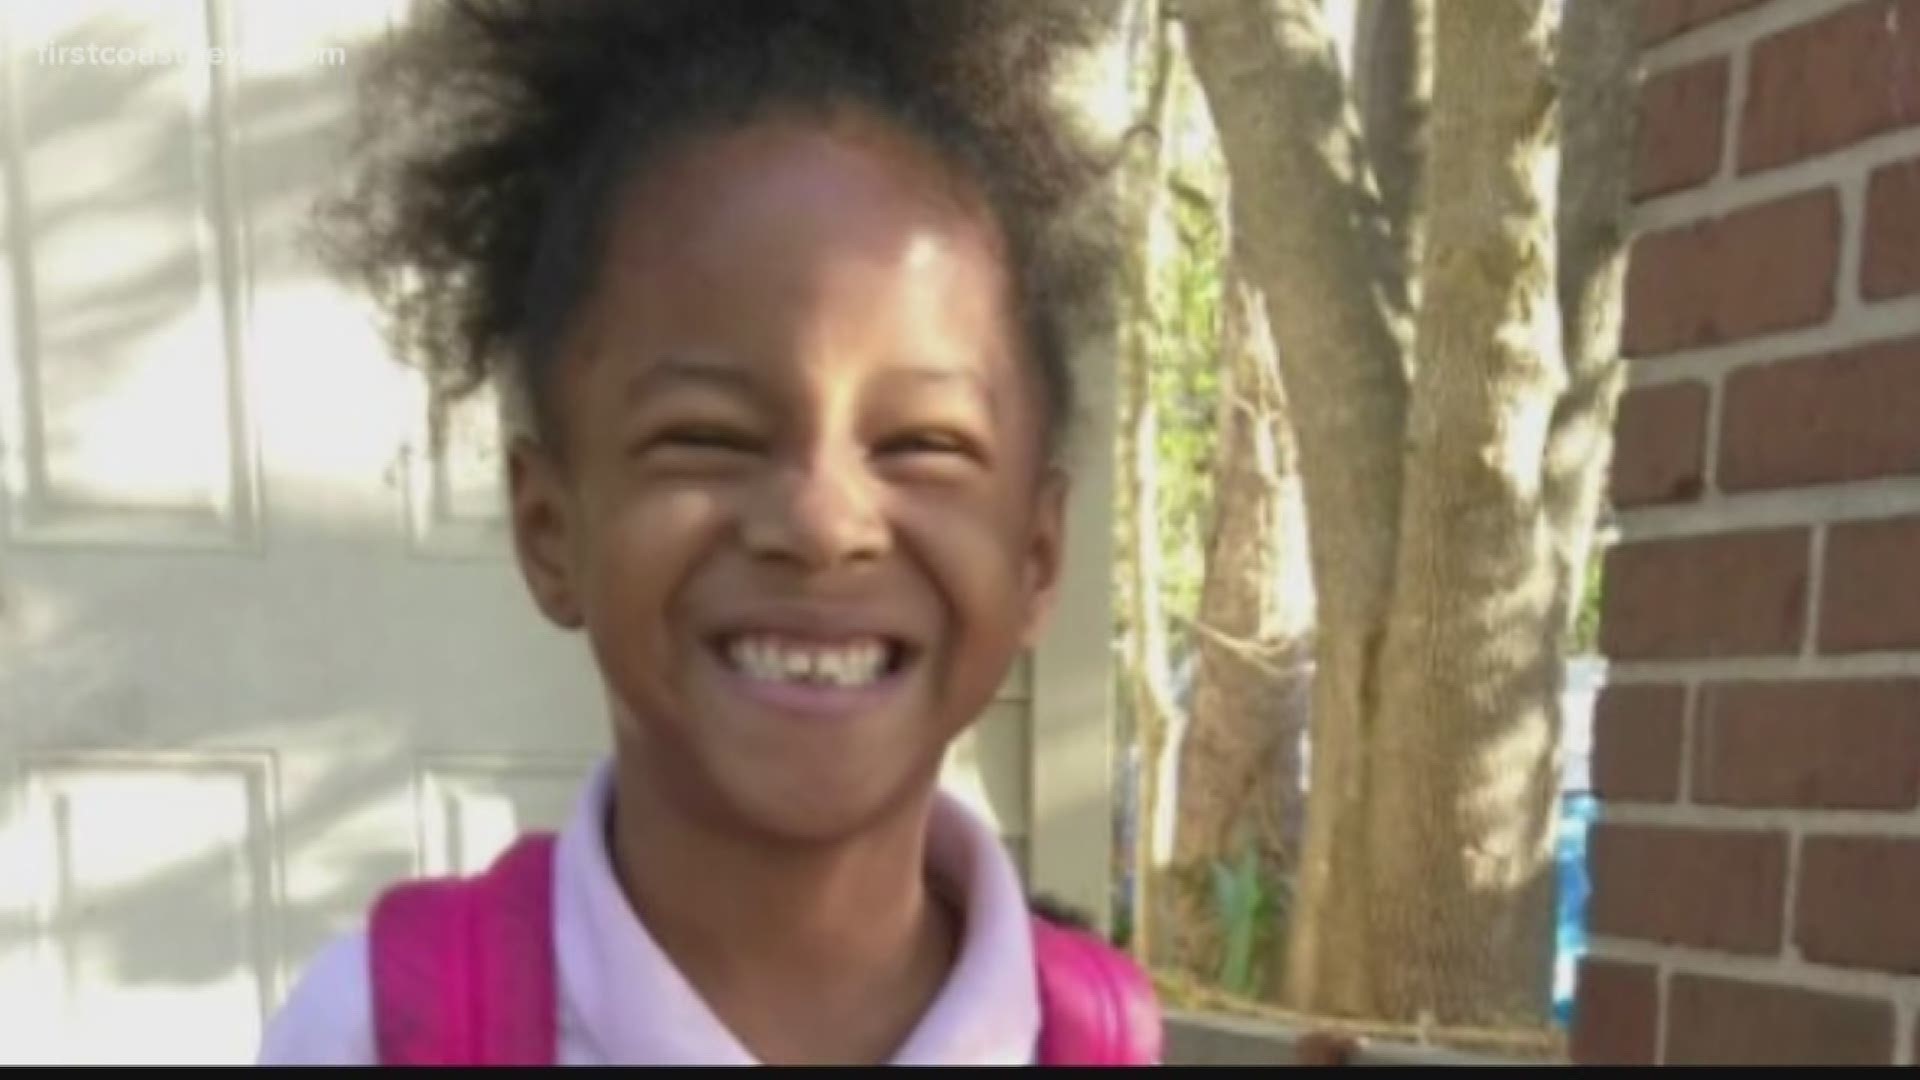 The 6-year-old girl who was attacked by a dog on Sunday has died, the Duval County Medical Examiner's Office confirmed with First Coast News on Wednesday.